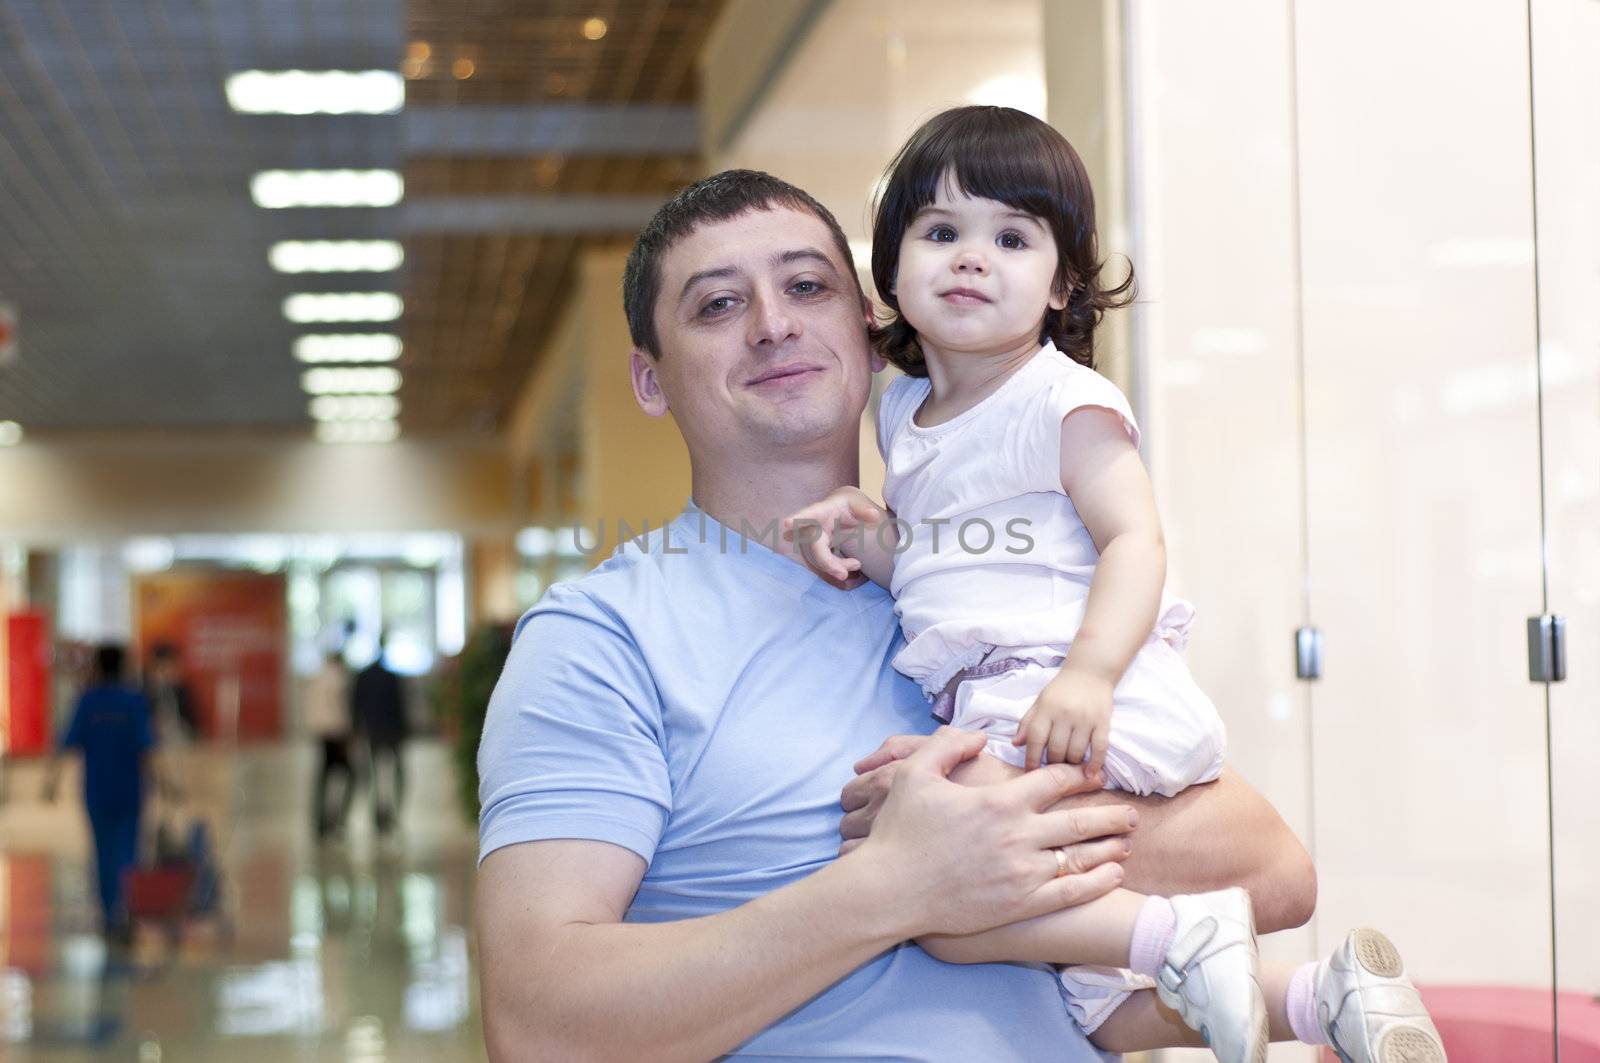 dad and the daughter in shopping center